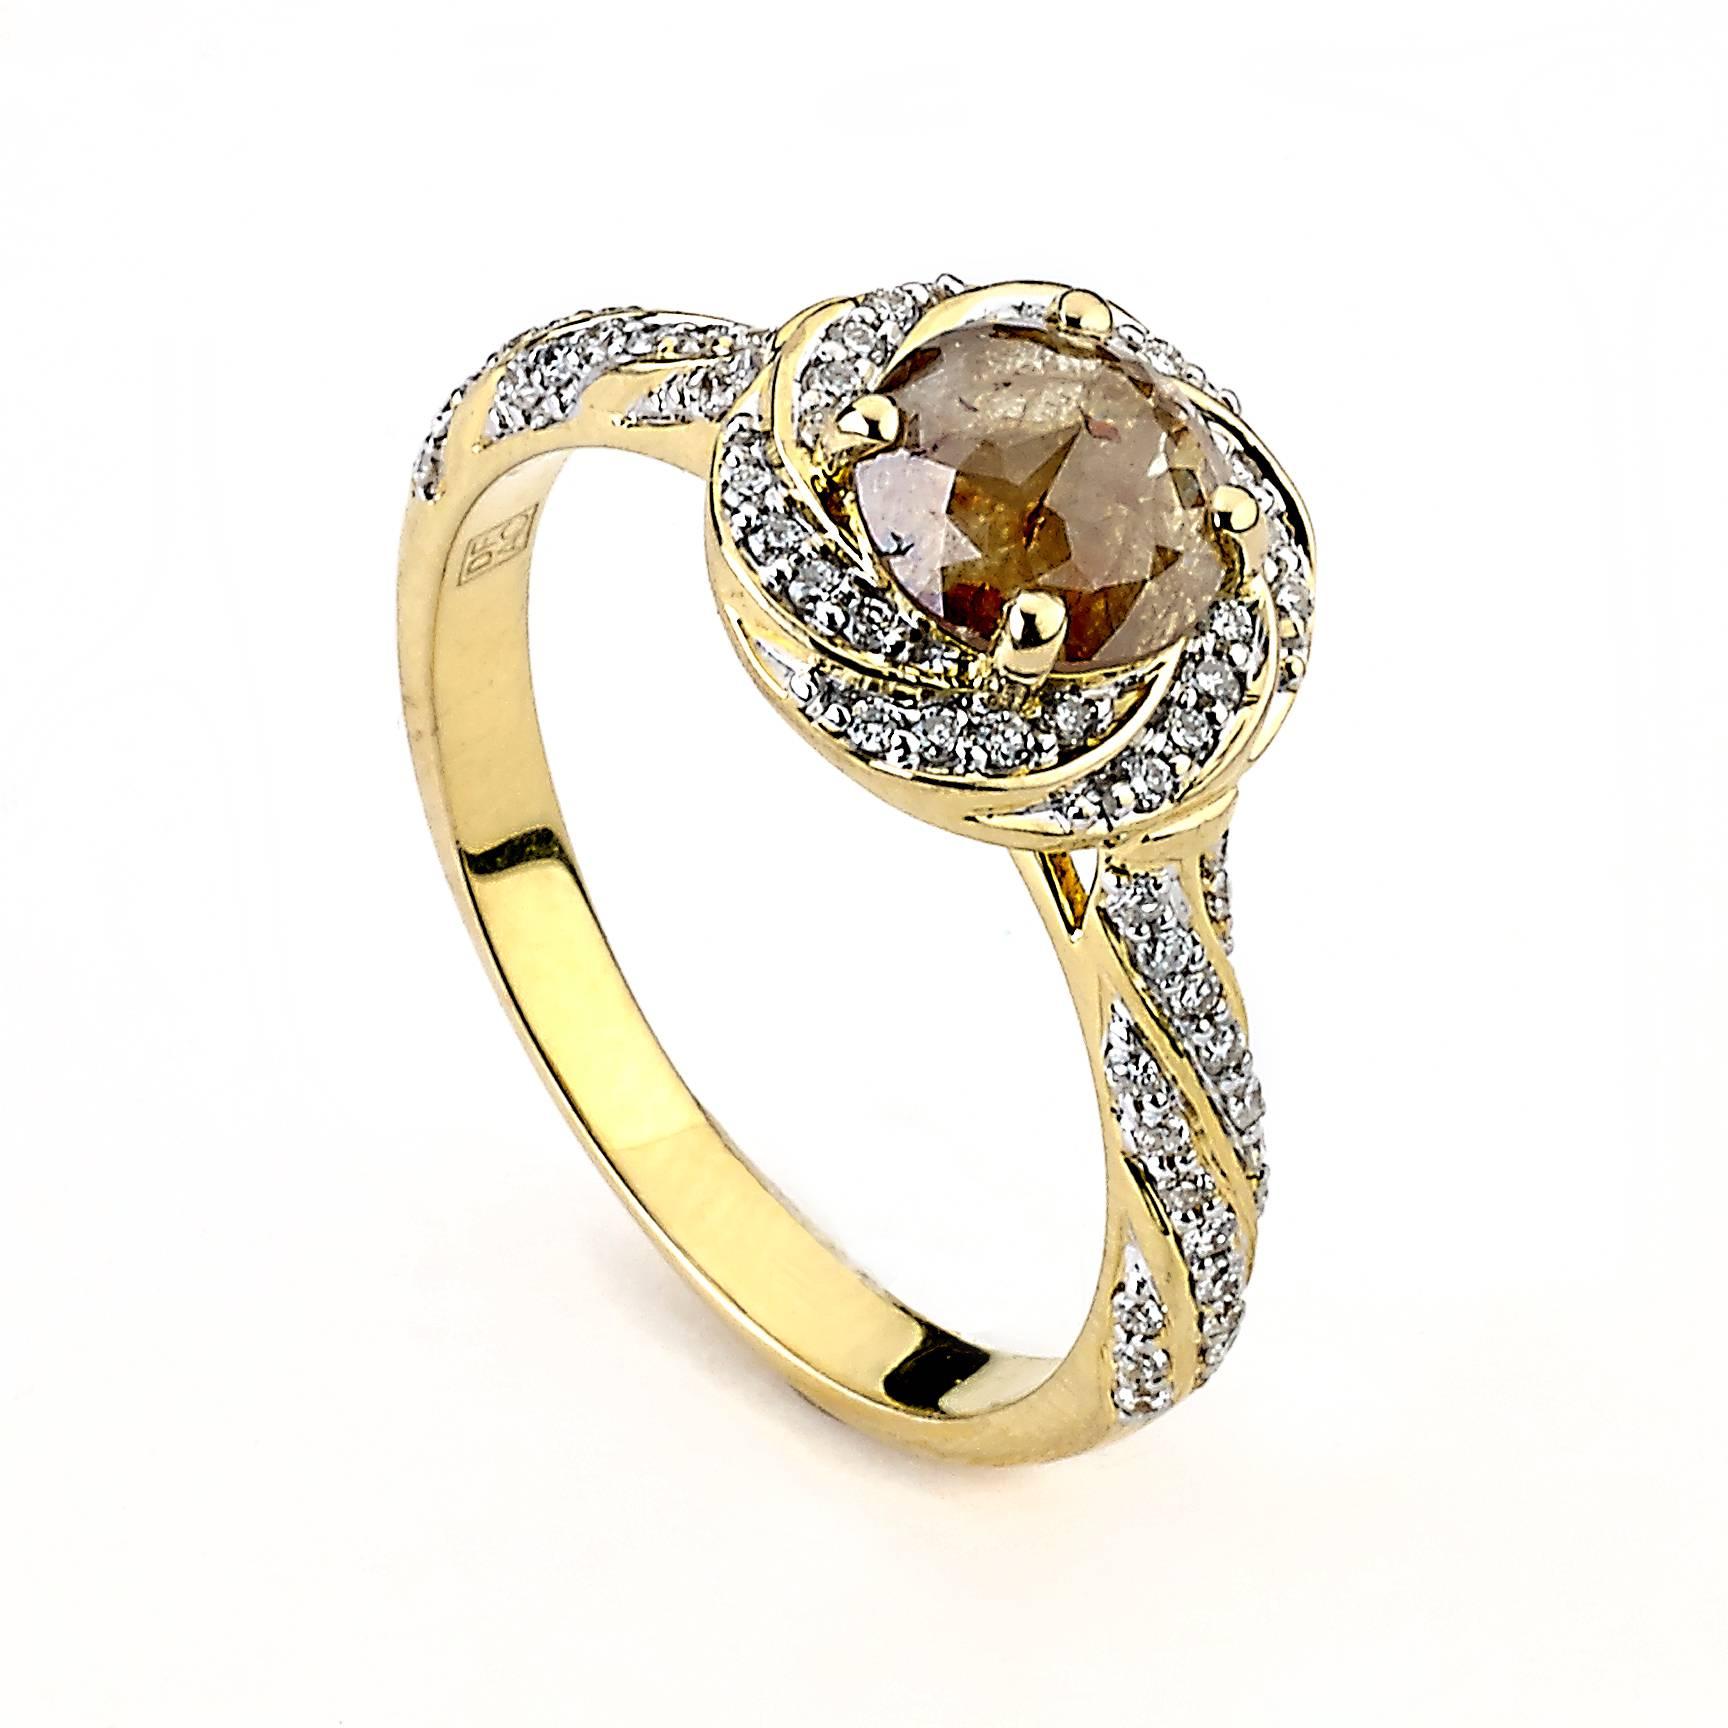 A deep Yellow Diamond is placed atop this ring, surrounded by smaller white diamonds in a Halo and along the band.
Polished 18k rose gold adds more color and class to this jewelry
Metal: rose gold 18k
Diamond Color : H-I White, Yellow
Total